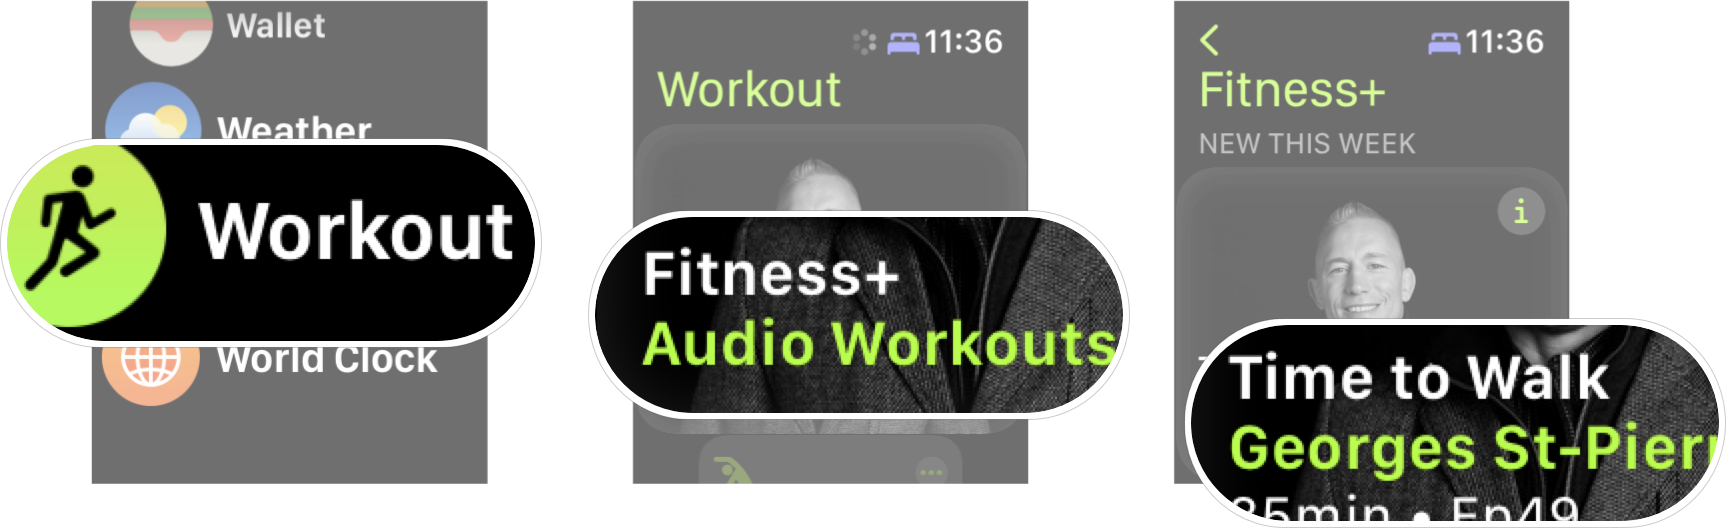 Launch Latest Time To Walk Episode On Apple Watch: Launch the Workout app from your Apple Watch, tpa audio workouts, then tap Time to Walk. 